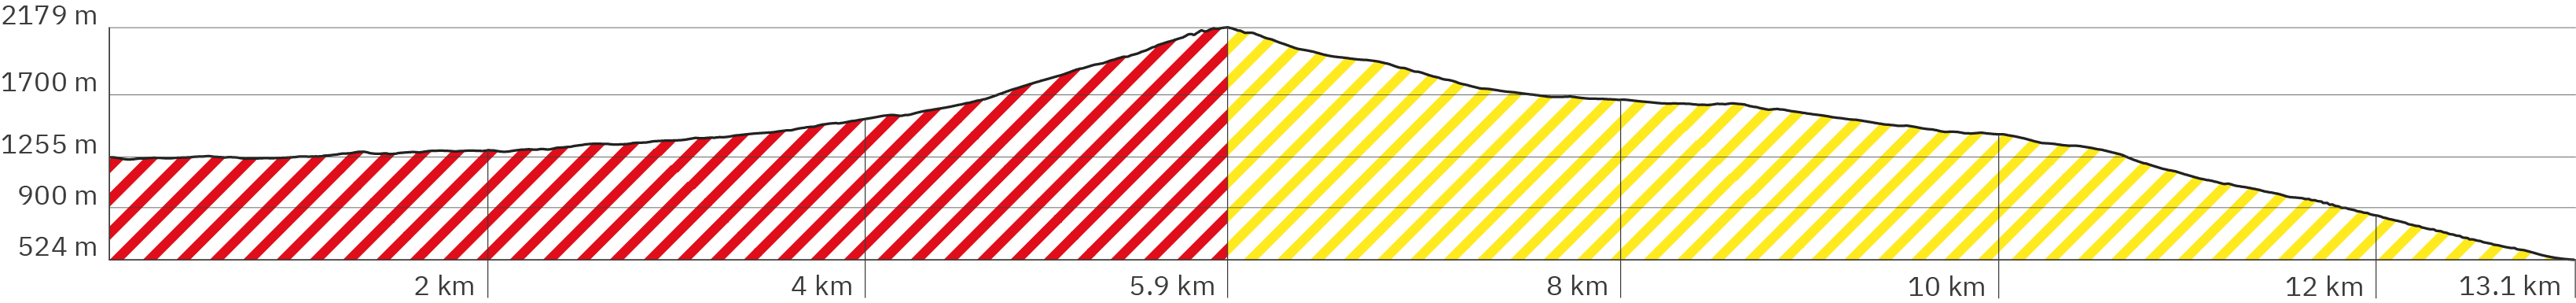 Elevation profile of the hike up Adam's Peak in Sri Lanka - with the ascent (in red) from the northeast on the Hatton Road from Dalhousie or Nallathannyia to the summit and the descent (in yellow) heading southwest on the Rathnapurna Road. The climb begins at 1,255 meters and leads steadily uphill, slightly flatter at the beginning, becoming steeper towards the end until very steep shortly before the highest point at 2,179 meters at kilometer 5.9. The descent to Ratnapurna is a steady descent and is about 1.3 kilometers longer than the climb from Hatton. The descent initially leads very steeply downhill, then becomes a little flatter and then slightly steeper again in the last third. The total length is approximately 13.1 kilometers.